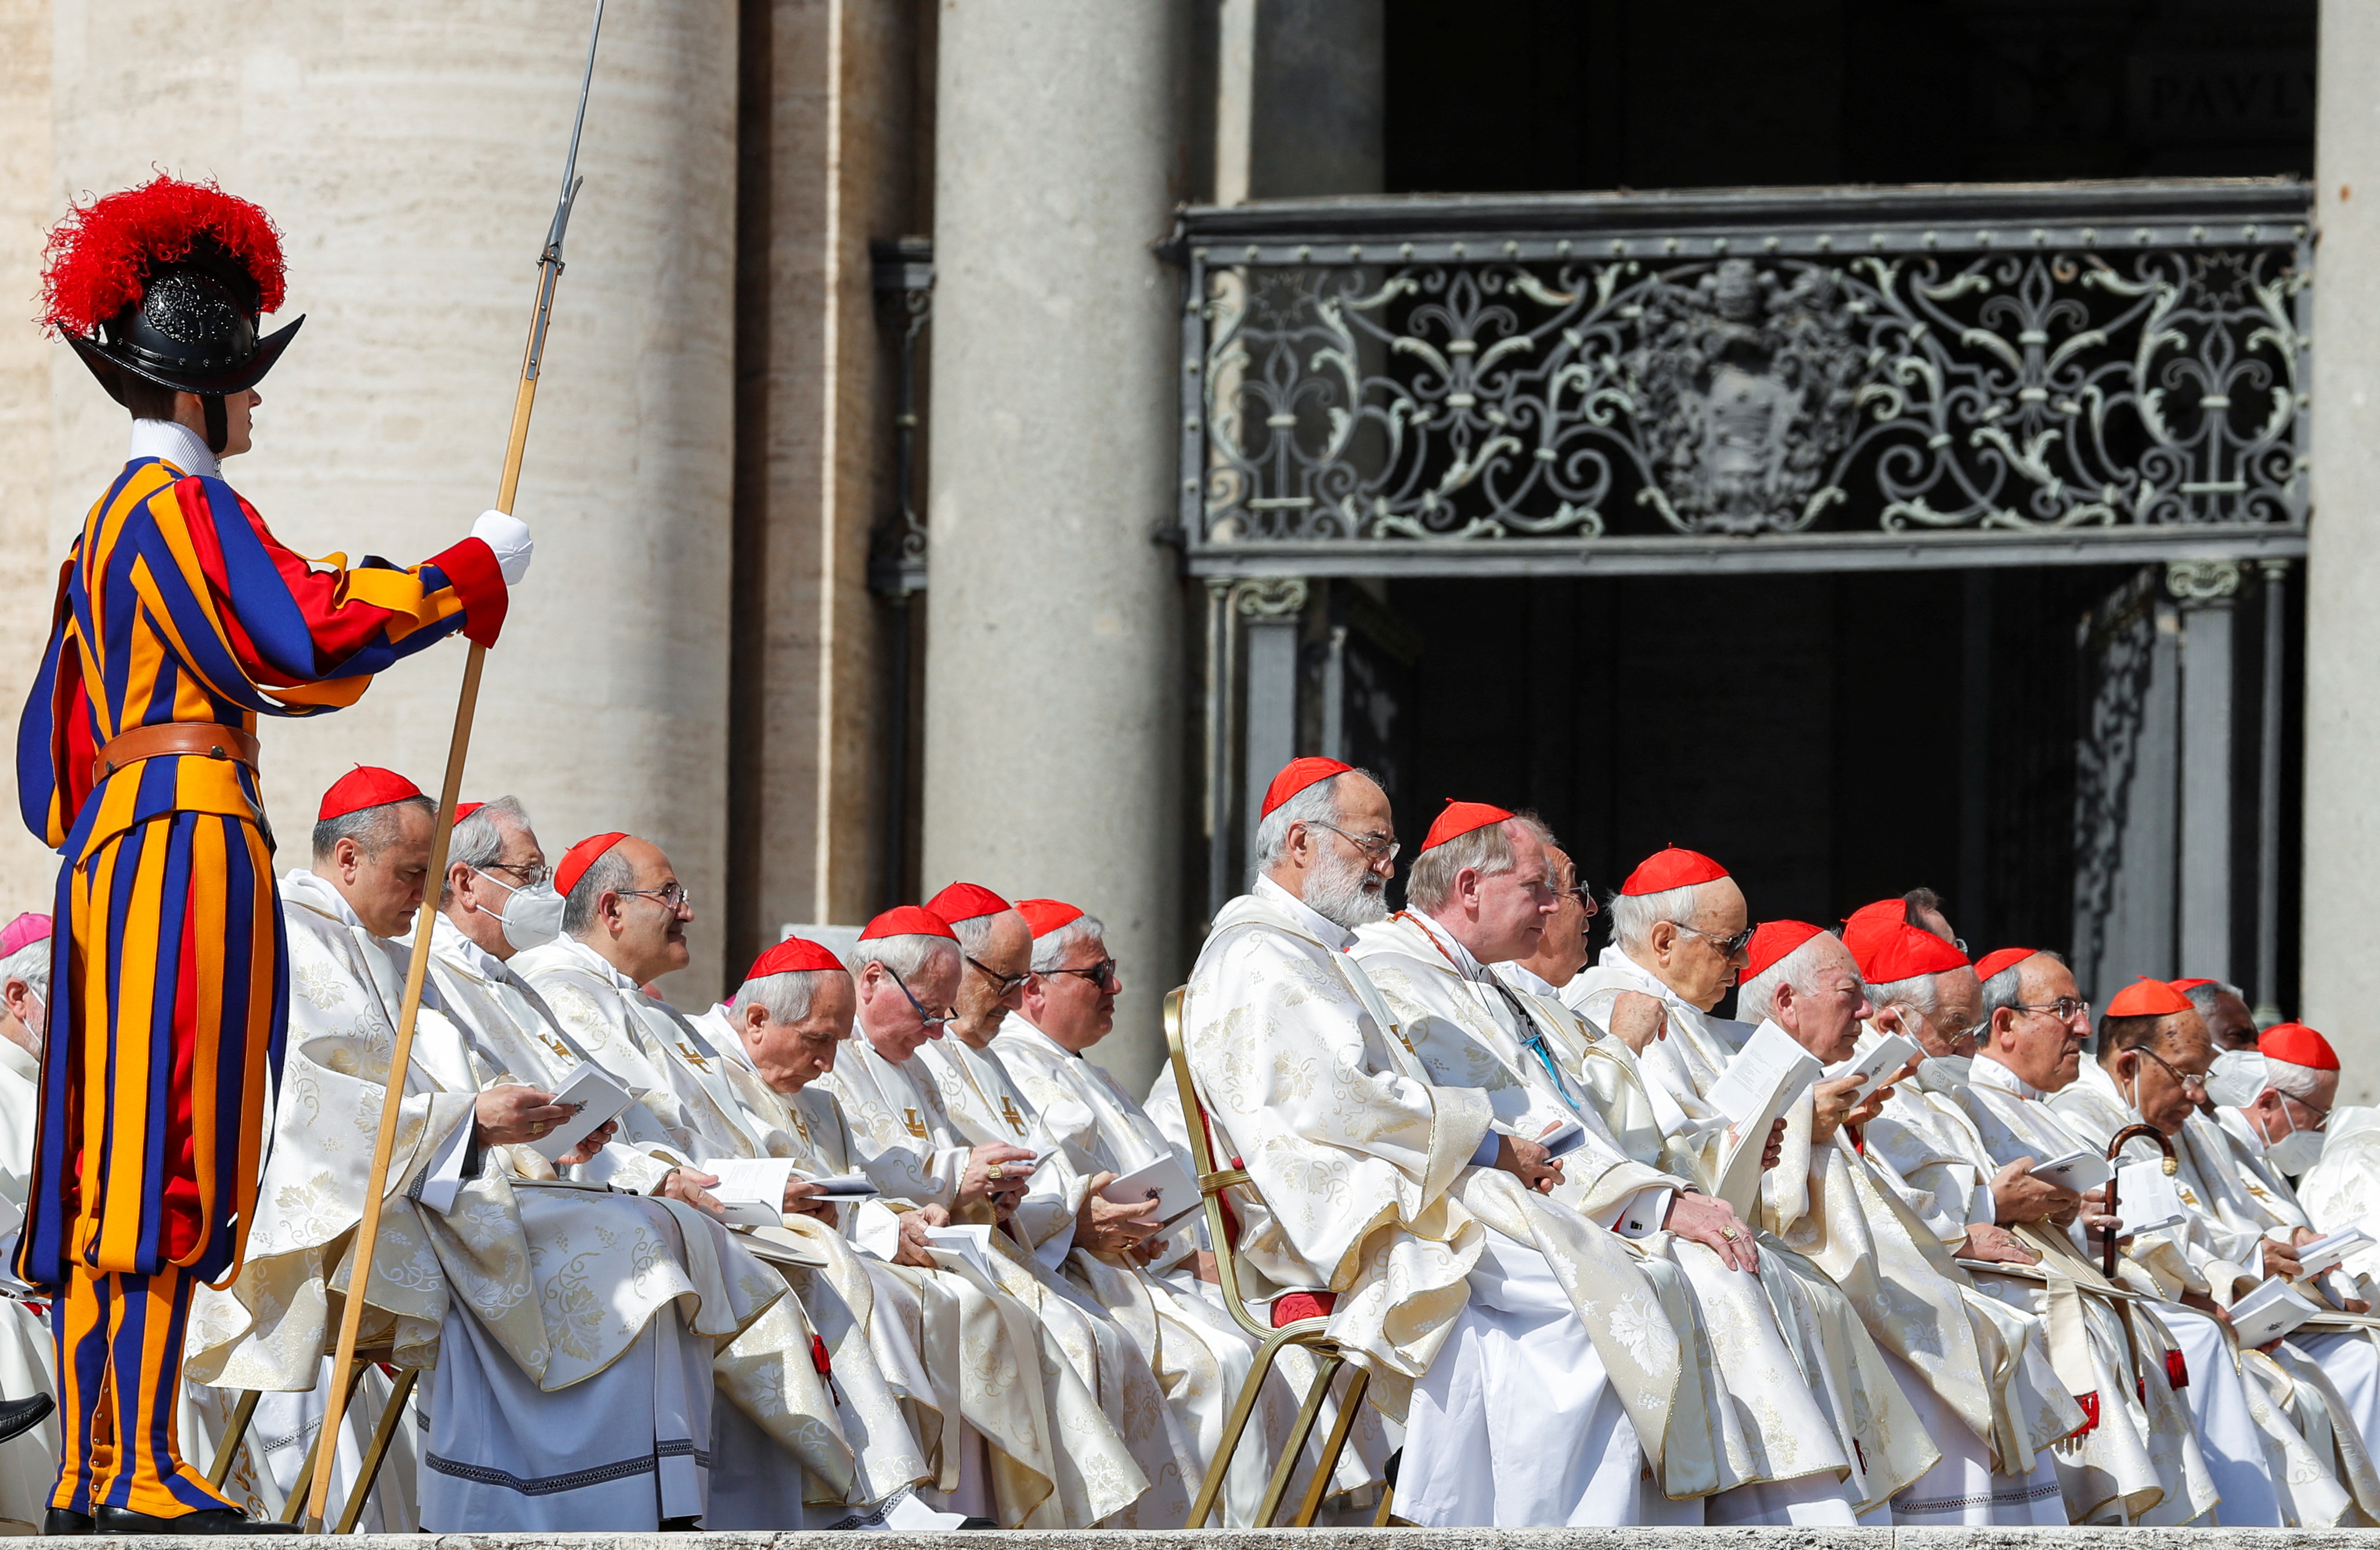 The cardinals during the celebration of the new saints.  REUTERS/Remo Casilli